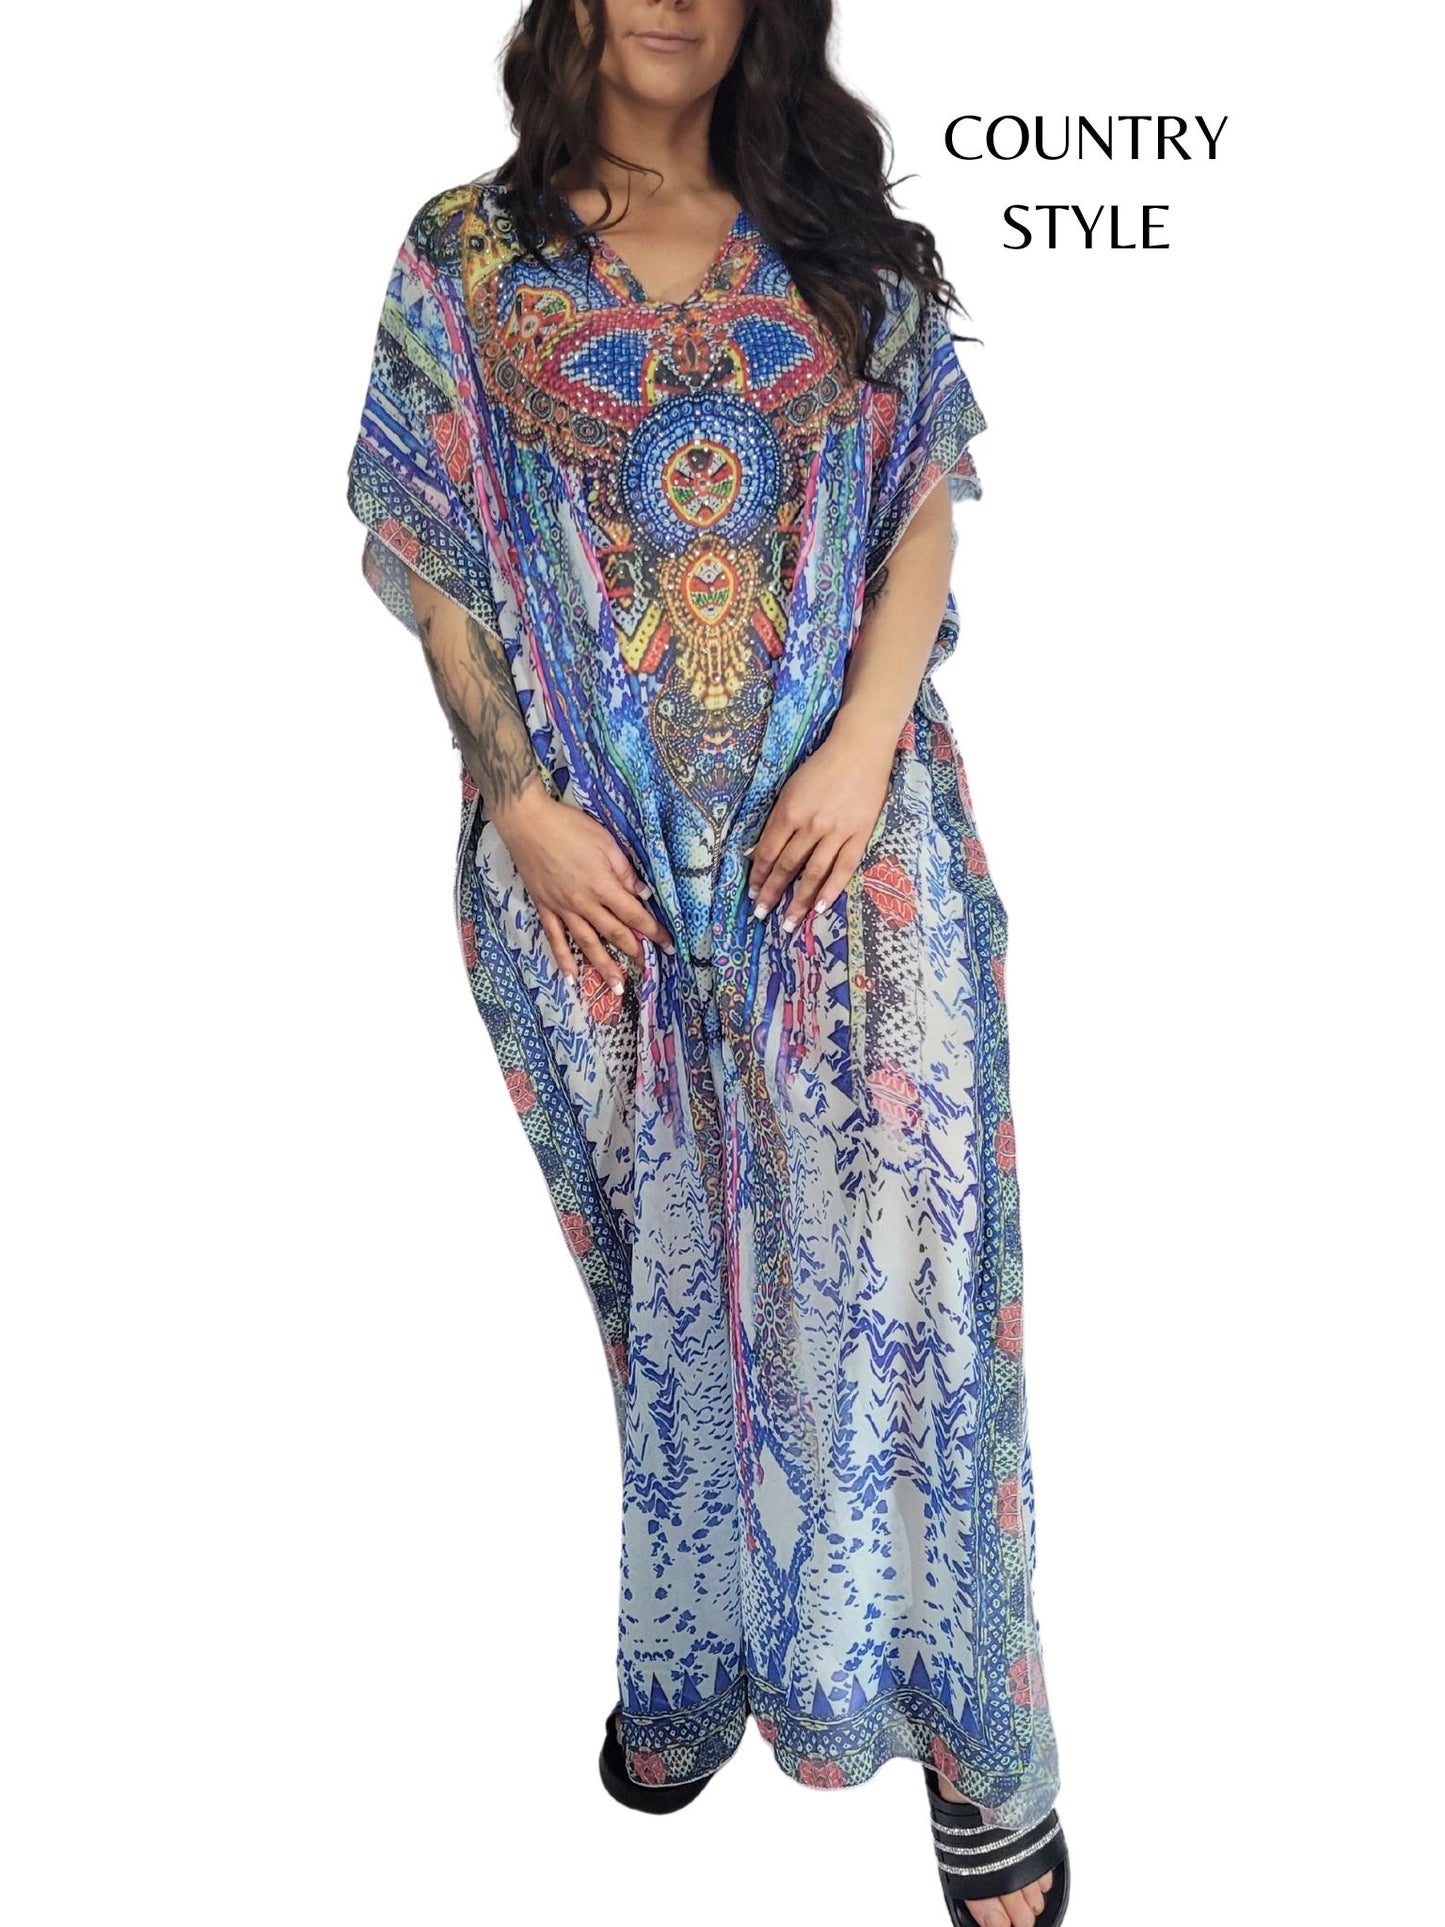 JAZZY Bejeweled Maxi Kaftan Dresses Colors - Sunset Blue Yellow, Turquoise Luxury, Country style, Grey Blue, Parrot Kaftan Dress Aambers Goodies xx 6-26 au (XS-7XL) COUNTRY STYLE 